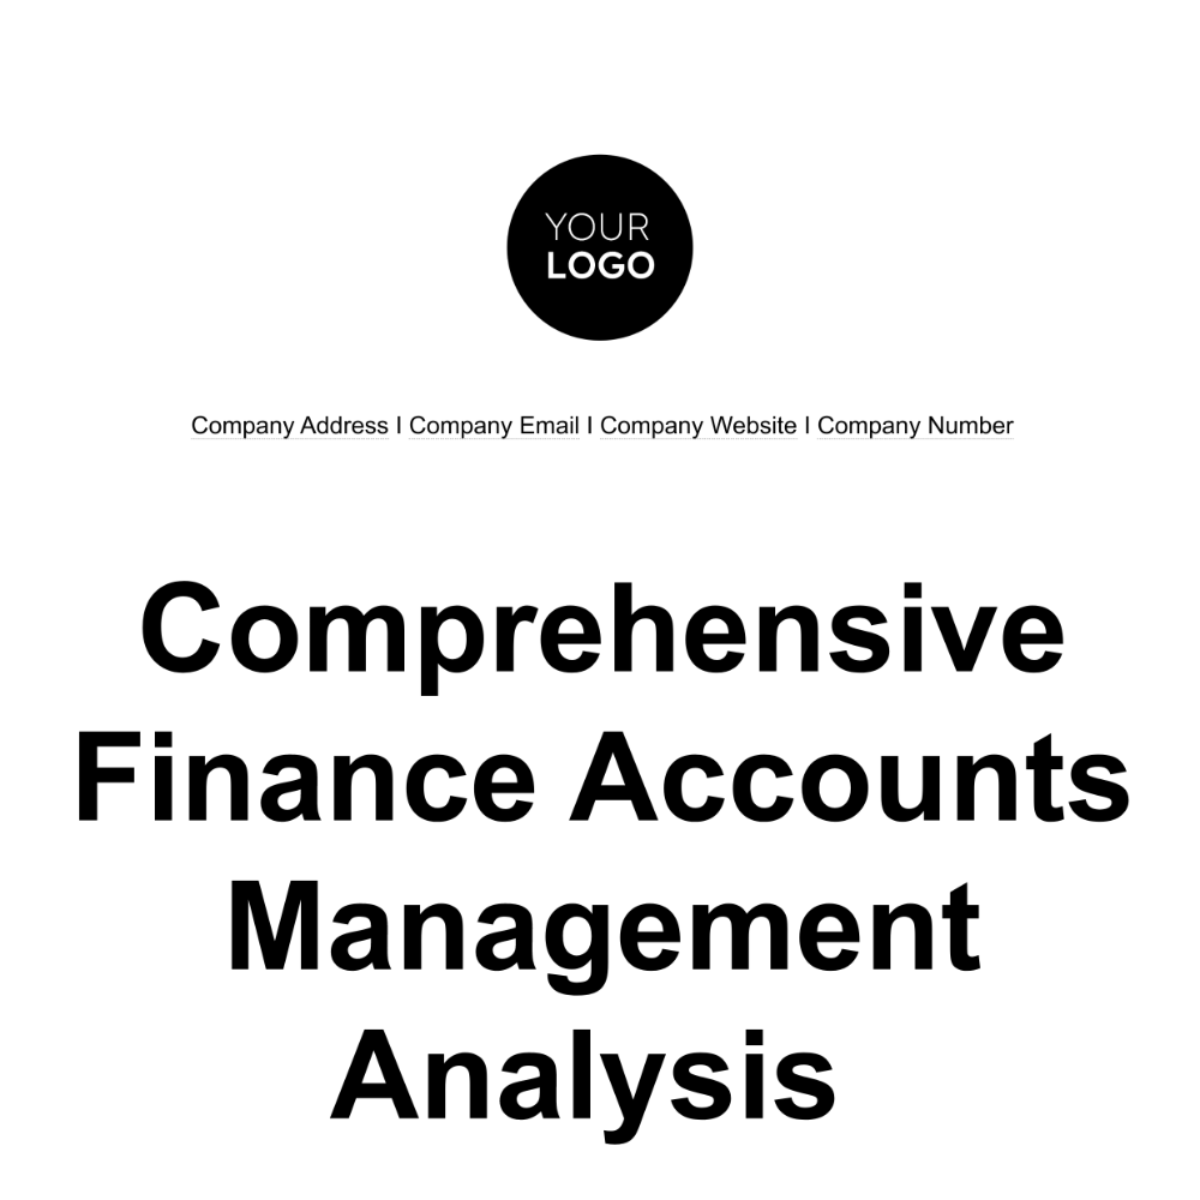 Comprehensive Finance Accounts Management Analysis Template